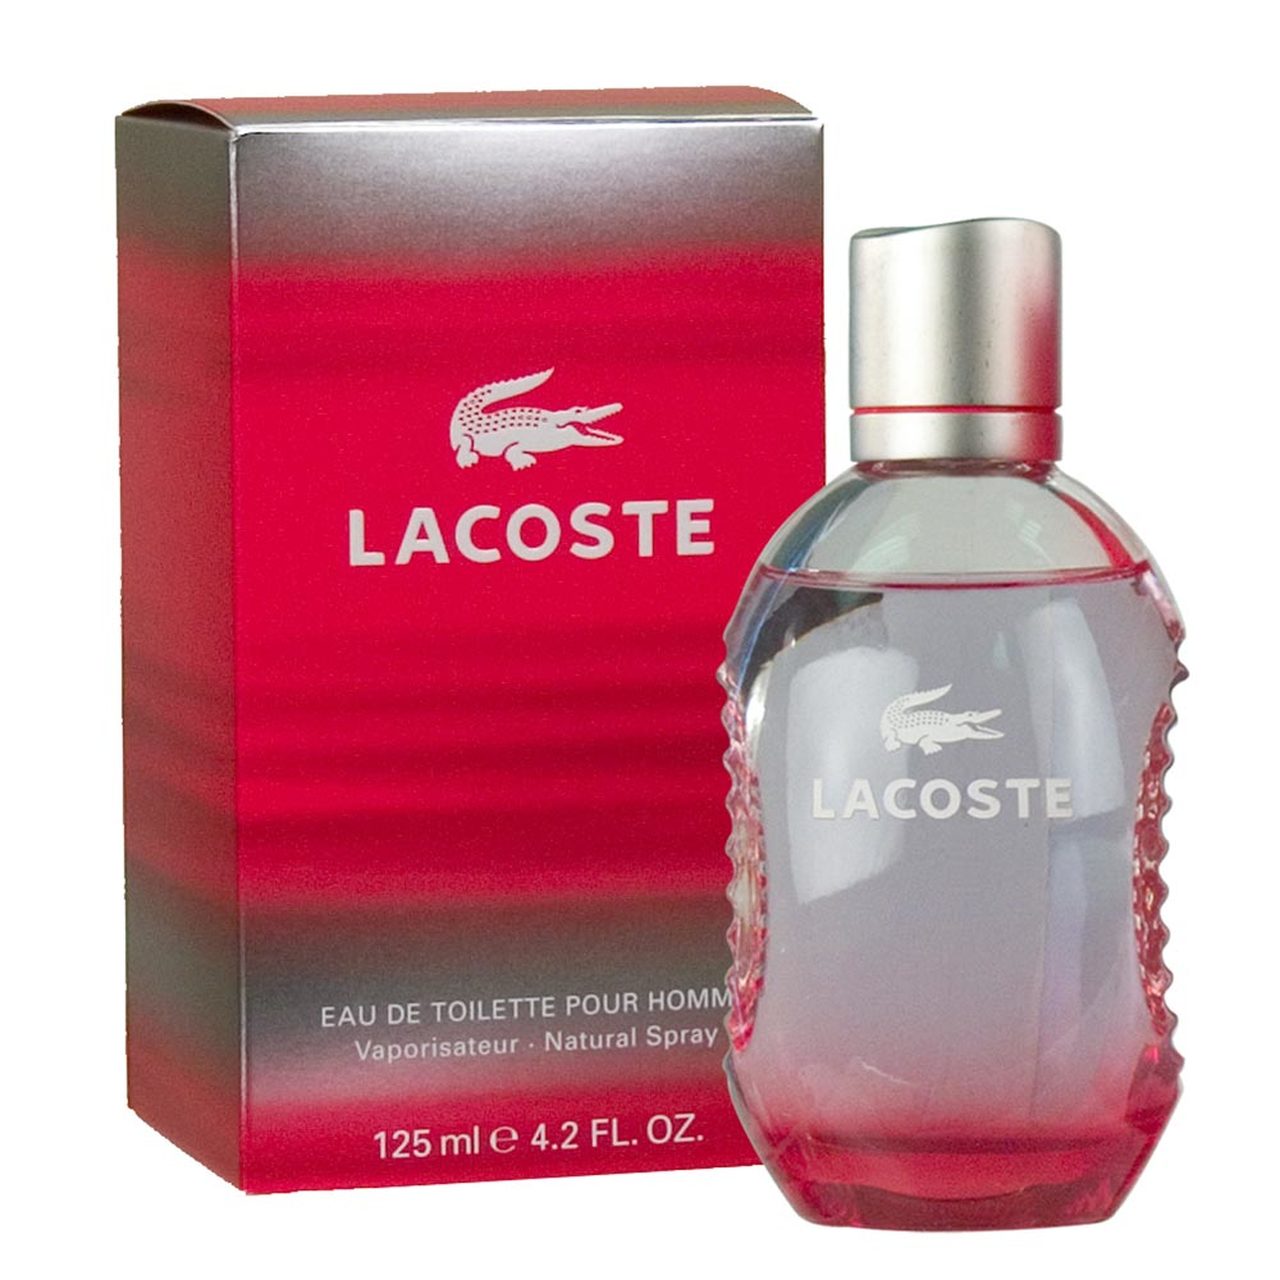 Лакост красный мужской. Lacoste Red Style in Play men 125ml EDT. Lacoste Style in Play Red, EDT, 125 ml. Lacoste туалетная вода Style in Play, 125 мл. Лакост Red Play Style.